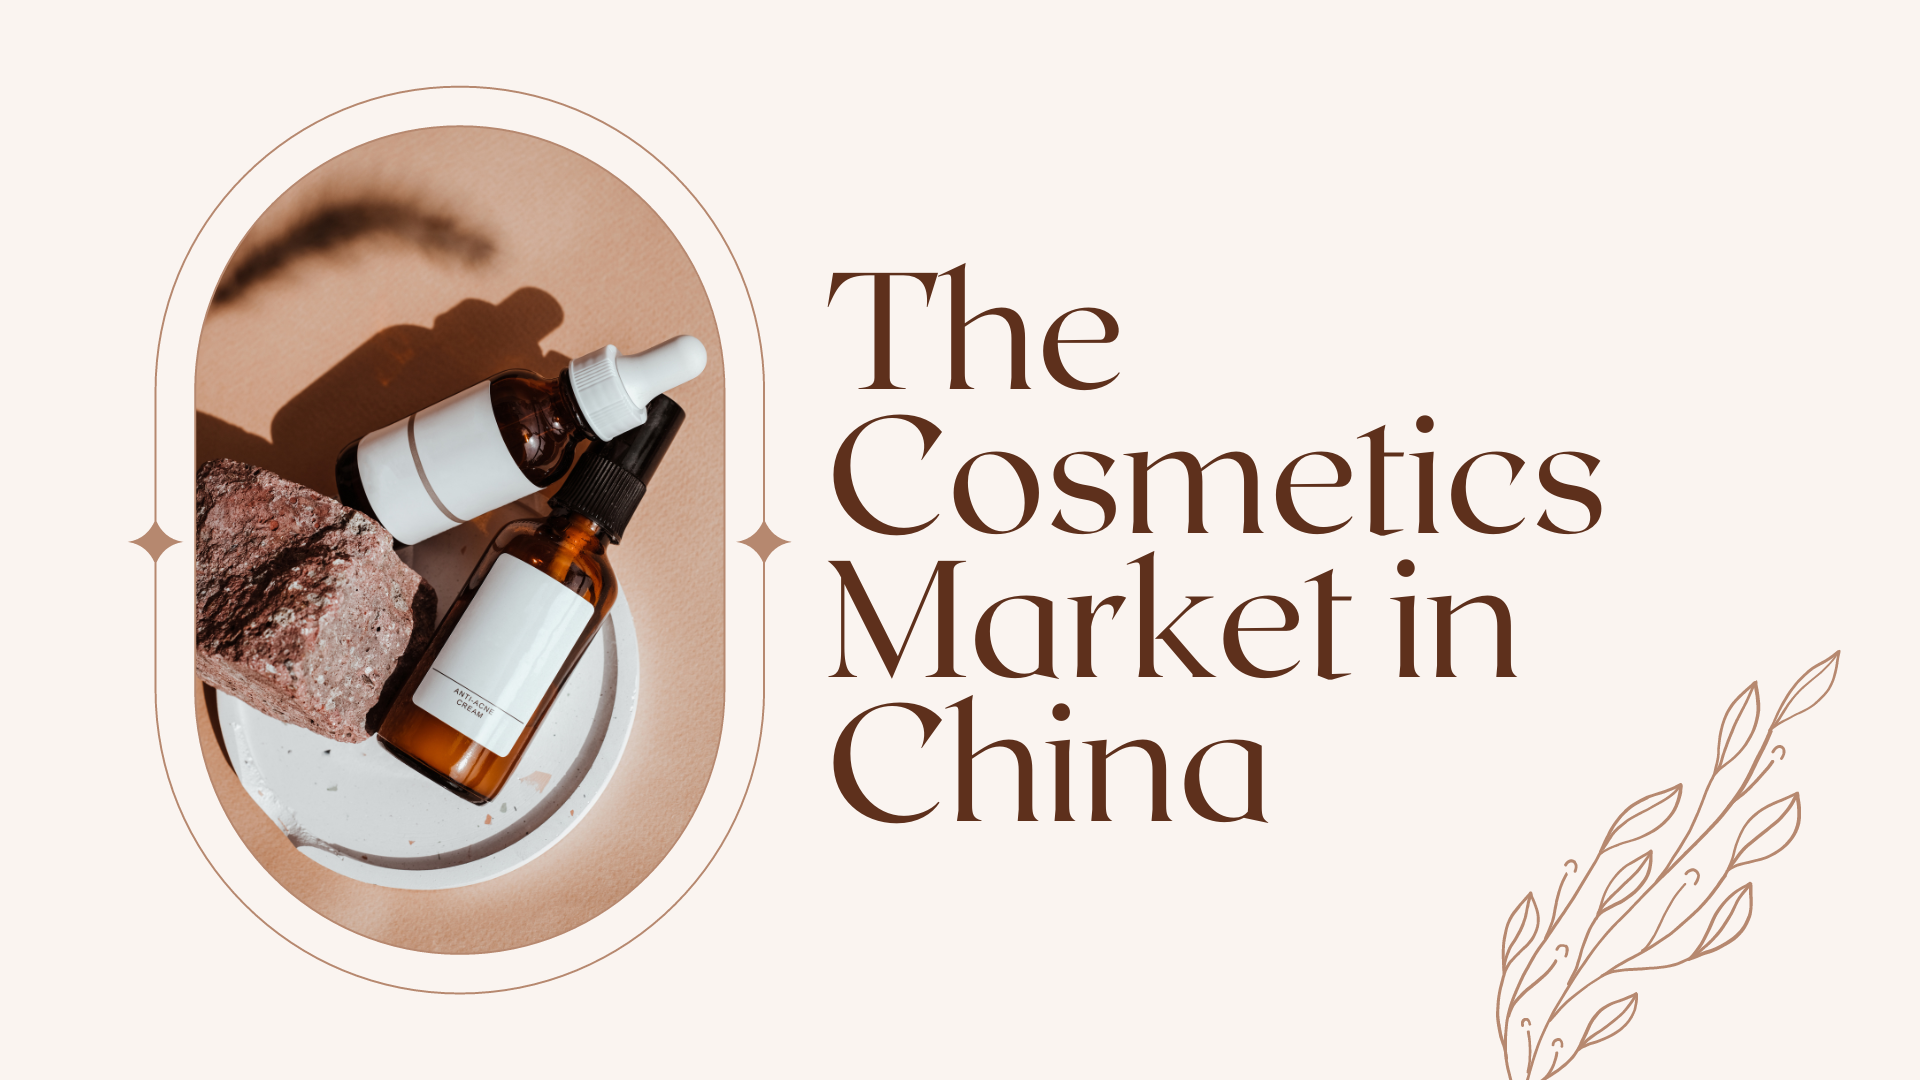 How China is fueling the growth of beauty brands, luxury players